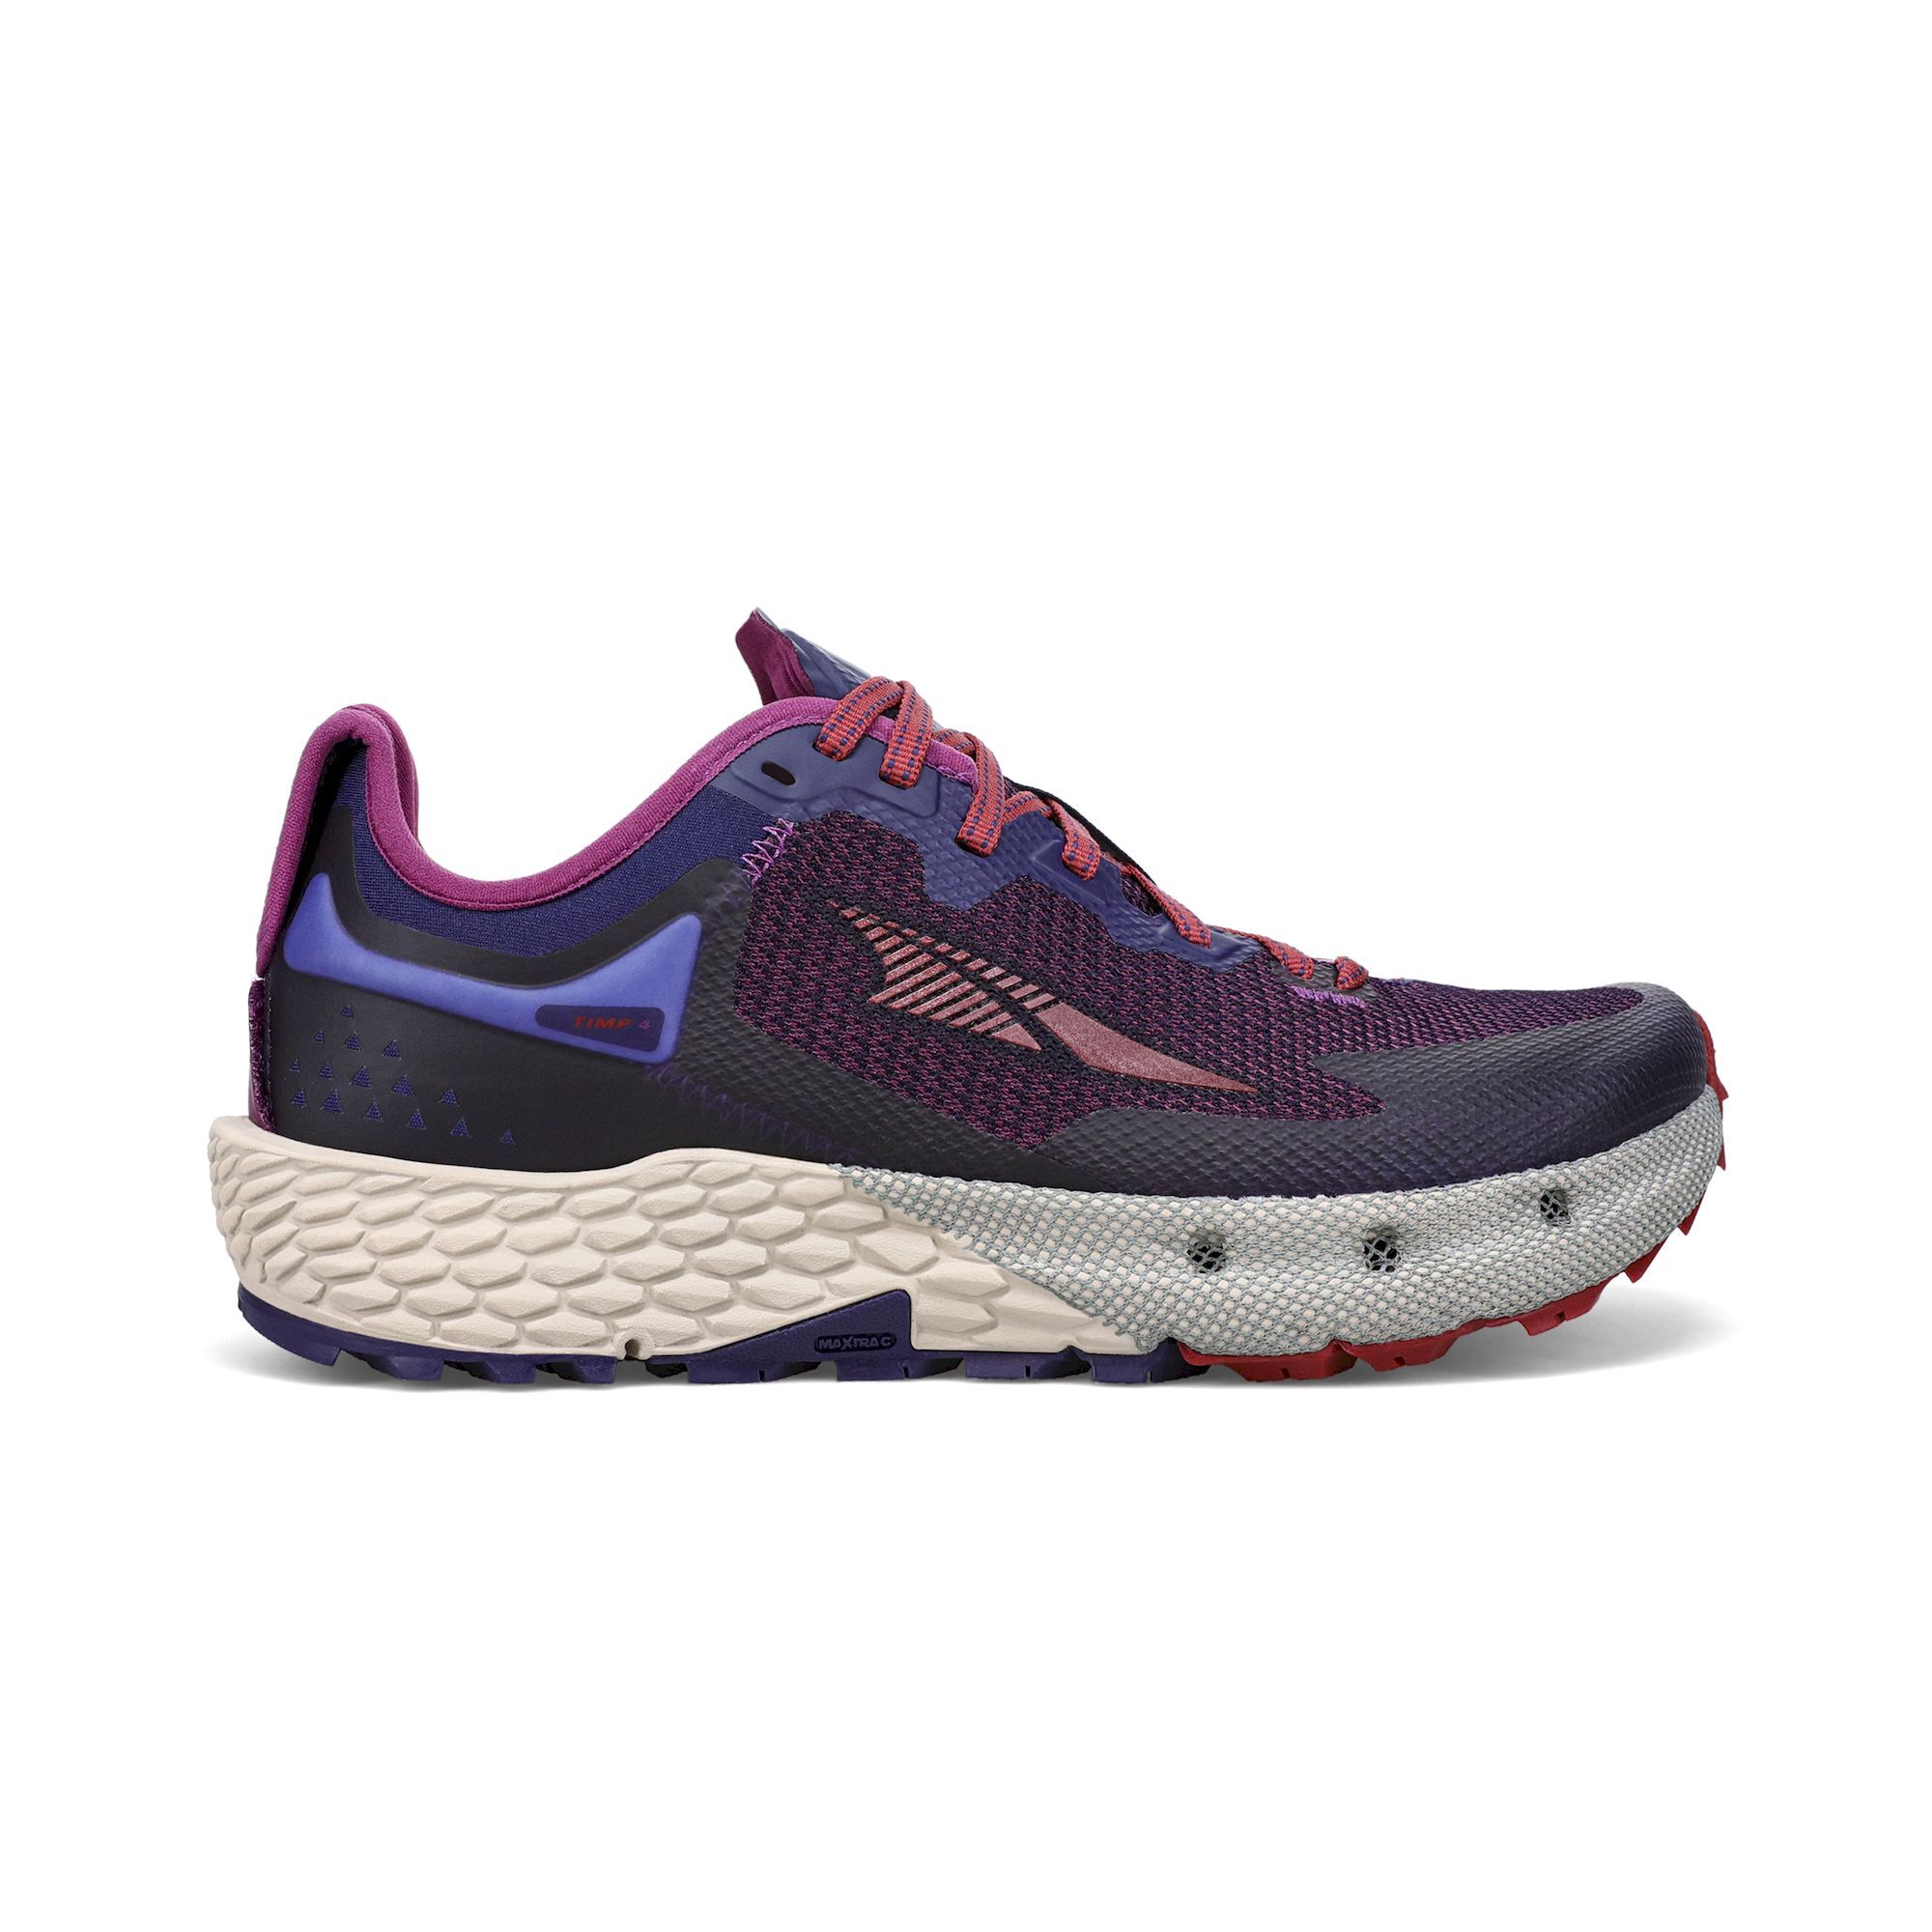 Altra Timp 4 - Trail running shoes - Women's